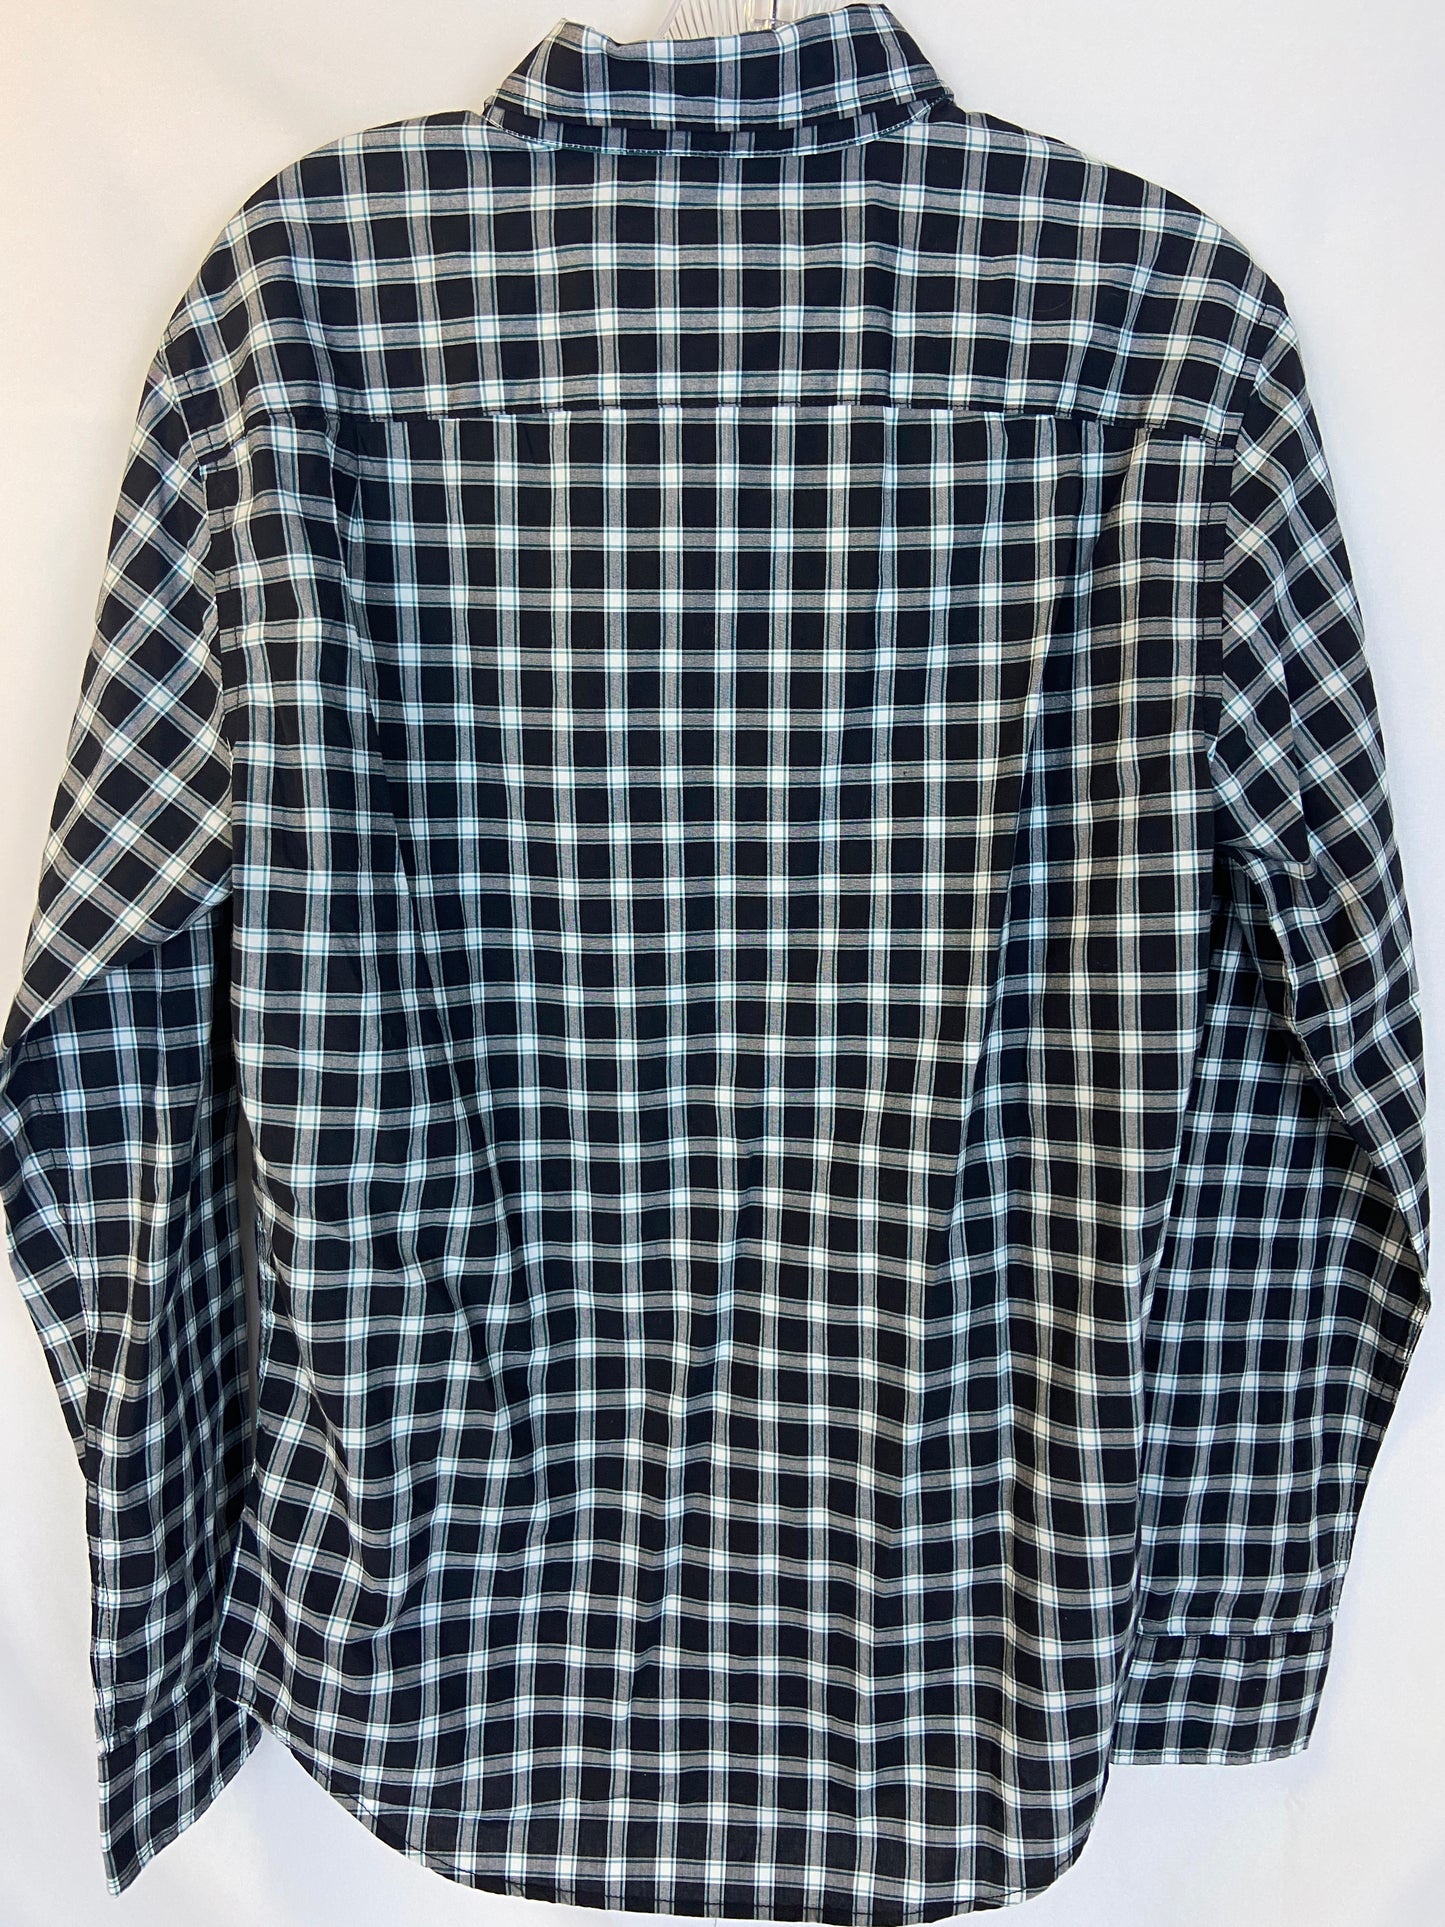 American Eagle Outfitters Men's S Black and Green Plaid Long Sleeve Shirt NWT